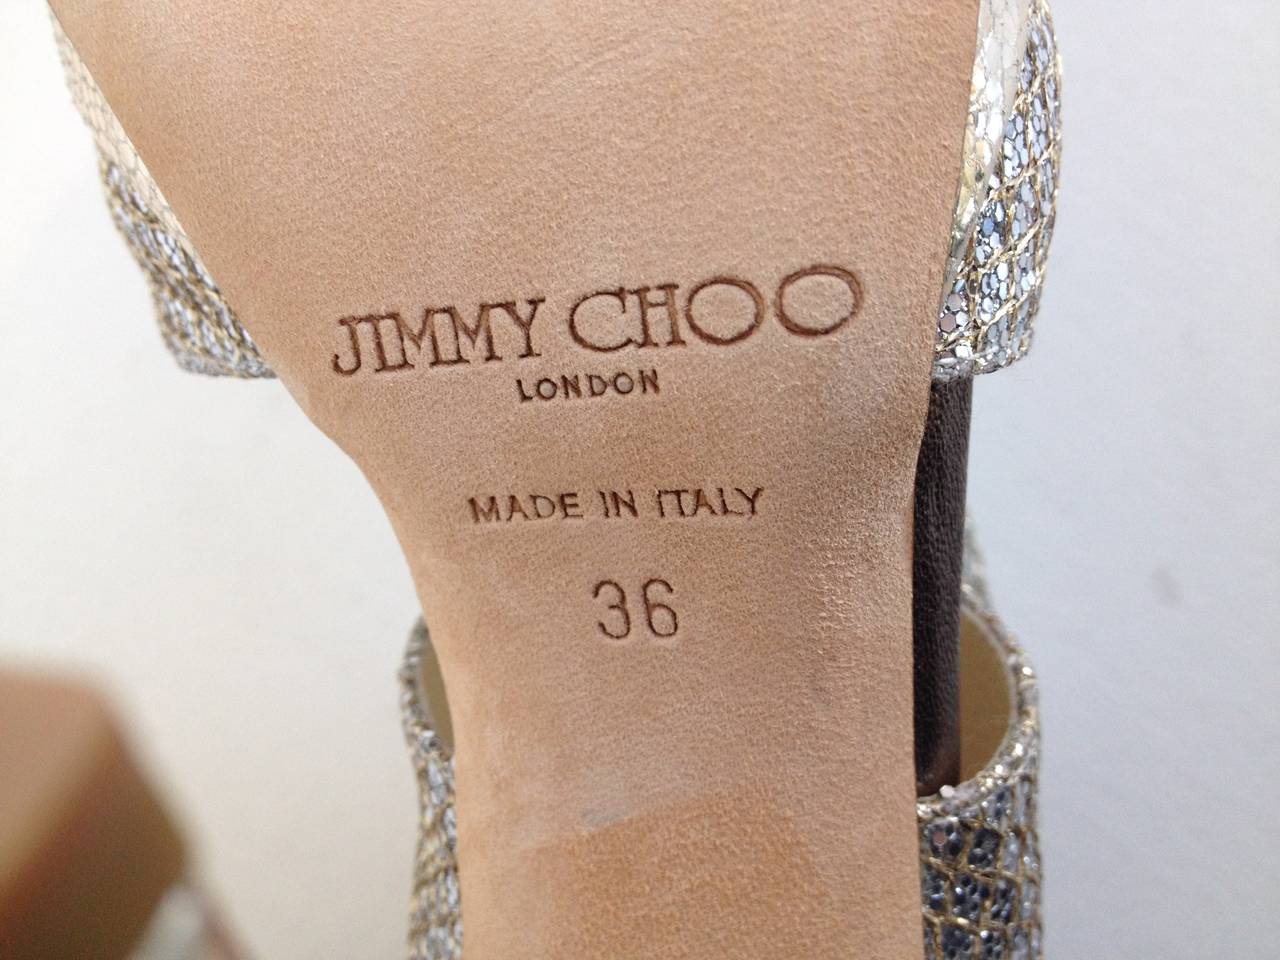 Women's Jimmy Choo Silver and Gold Sparkly Heels